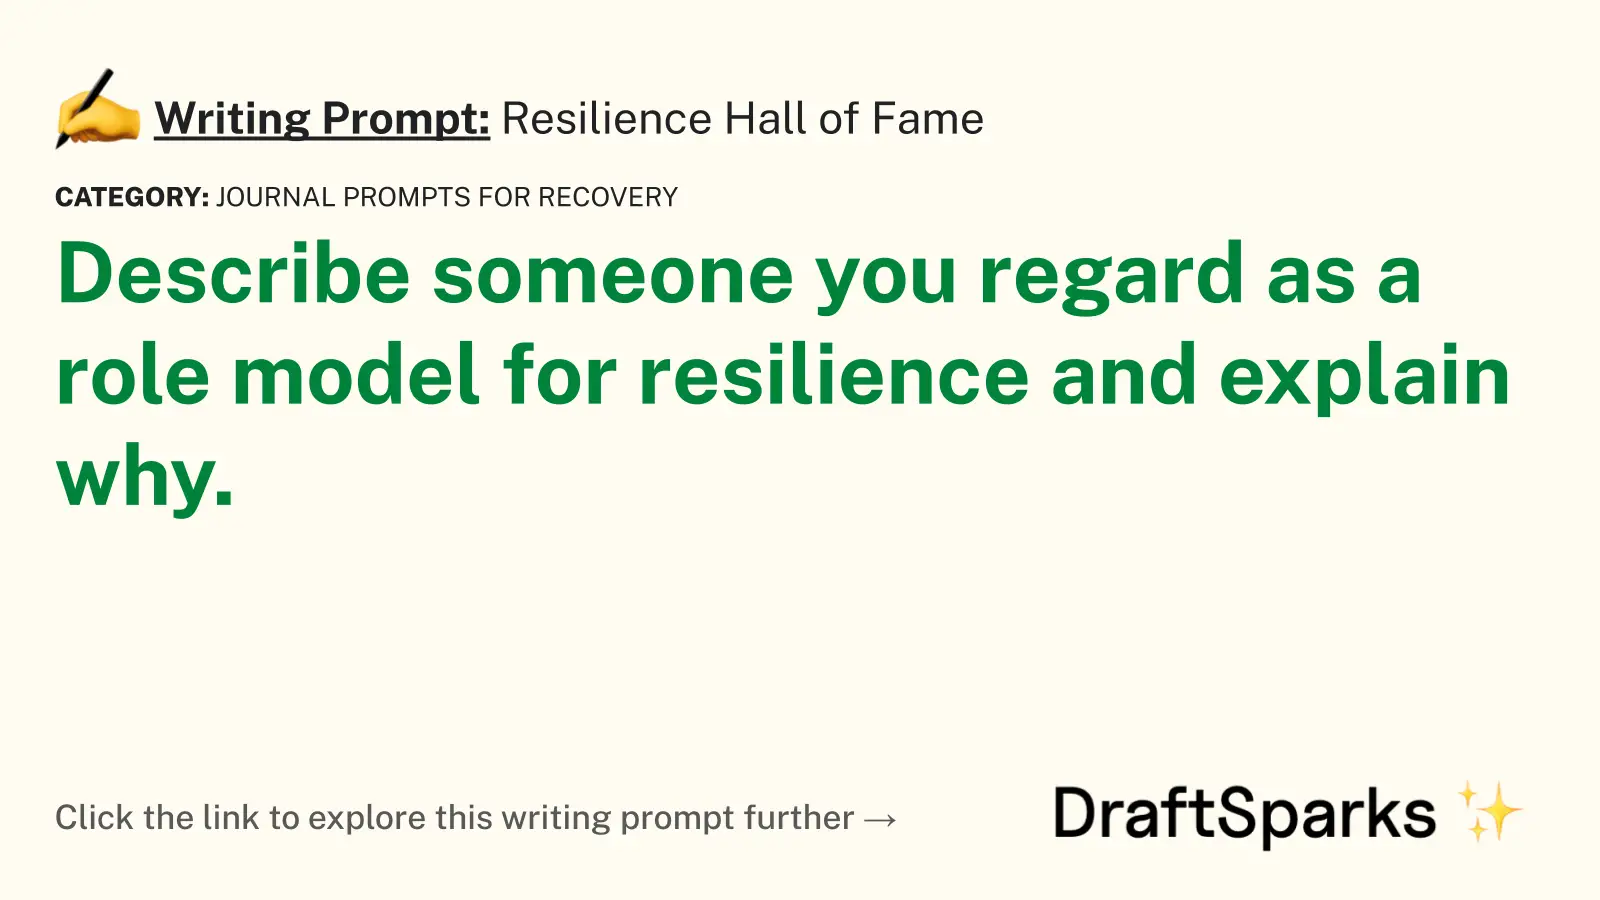 Resilience Hall of Fame